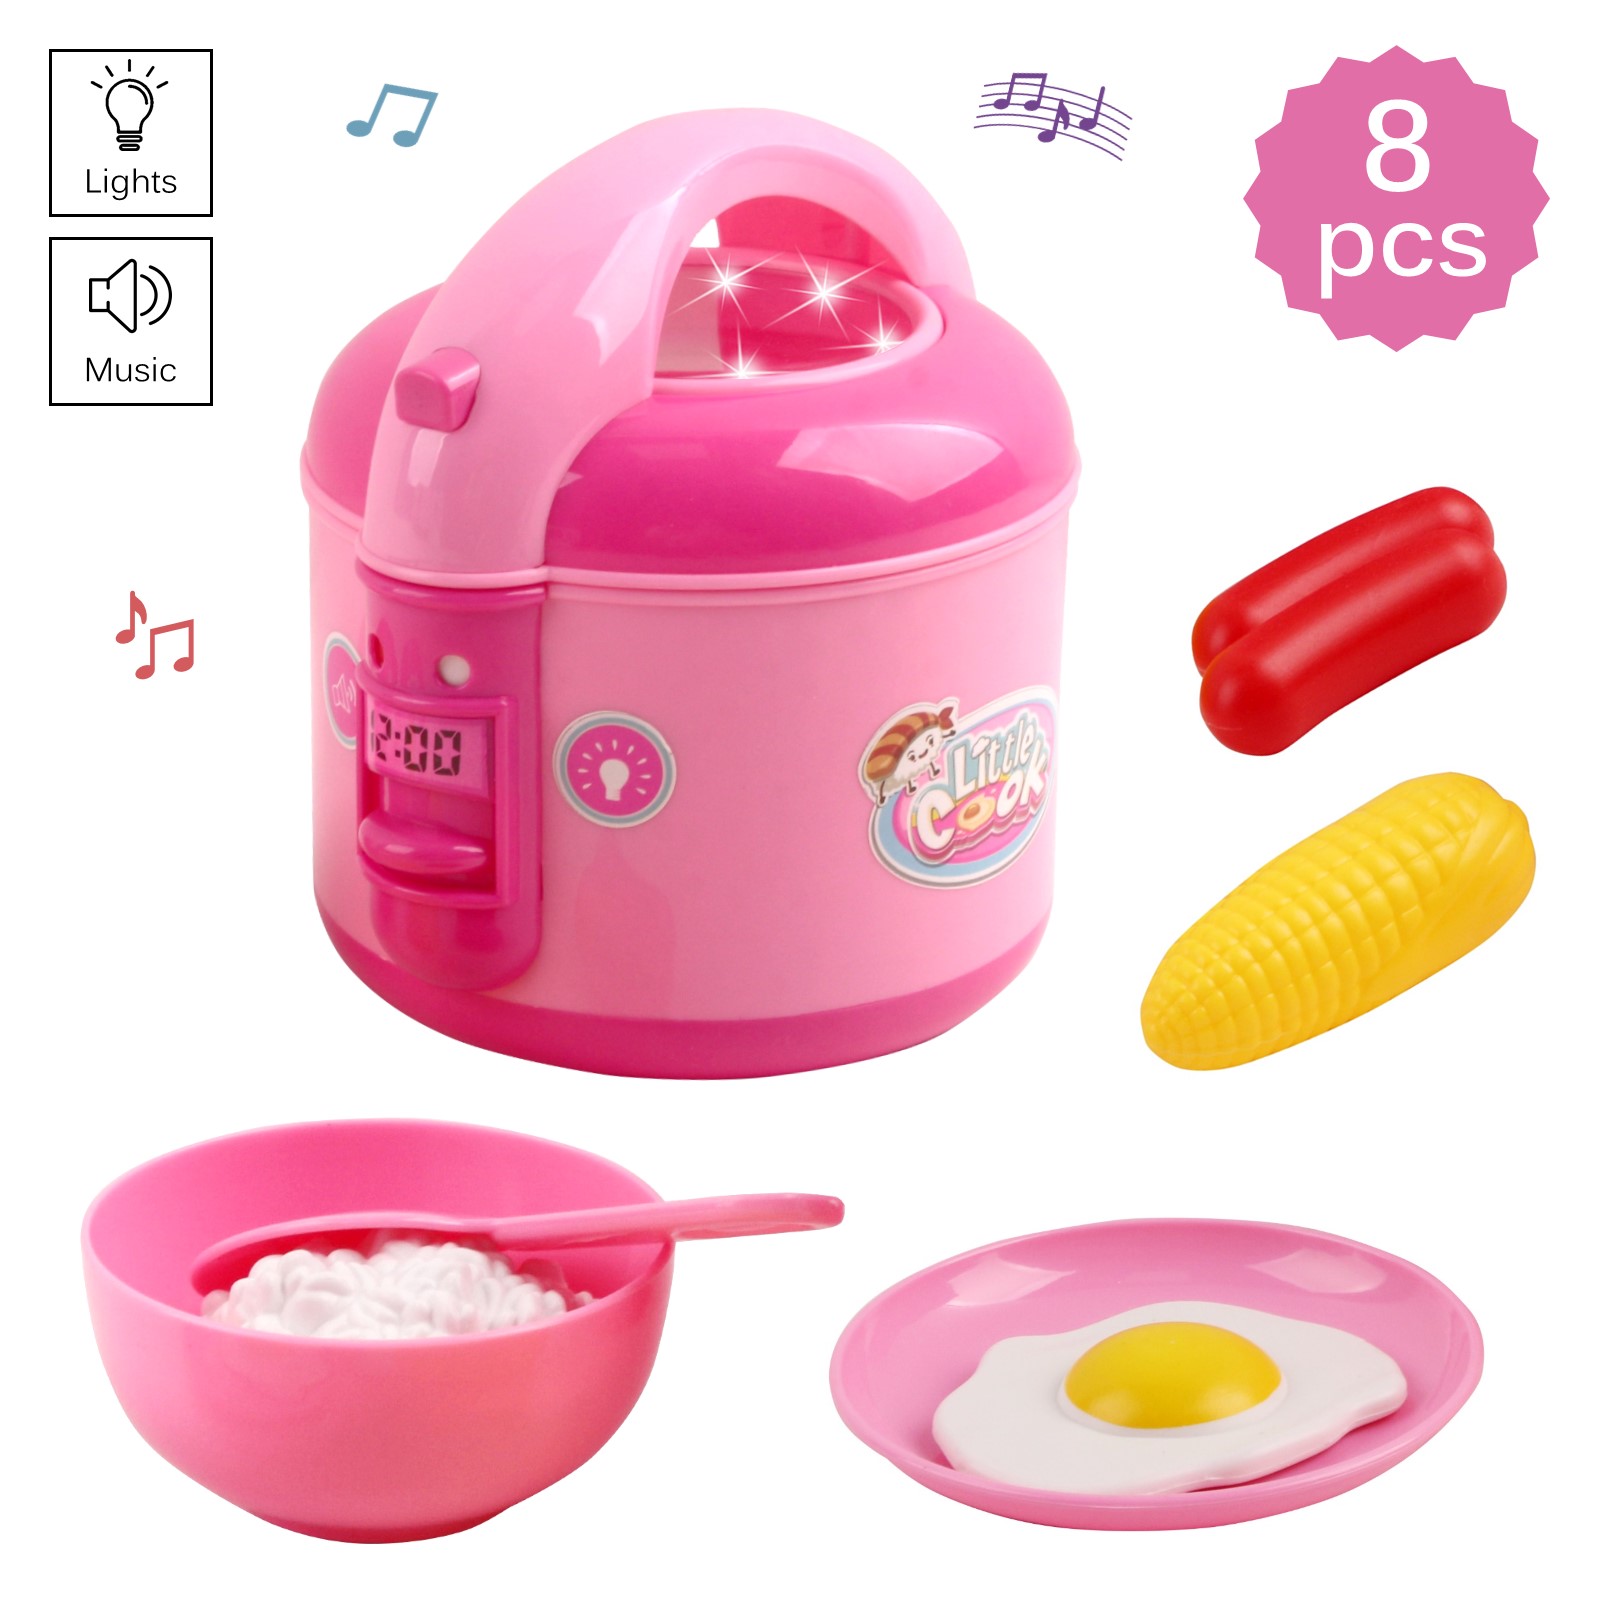 Vokodo Kids Rice Cooker Compact Size Kitchen Playset With Food Pieces Pretend Play Chef Appliances Early Learning Preschool Cooking Toy Battery Operated Great Gift For Children Boys Girls Toddlers